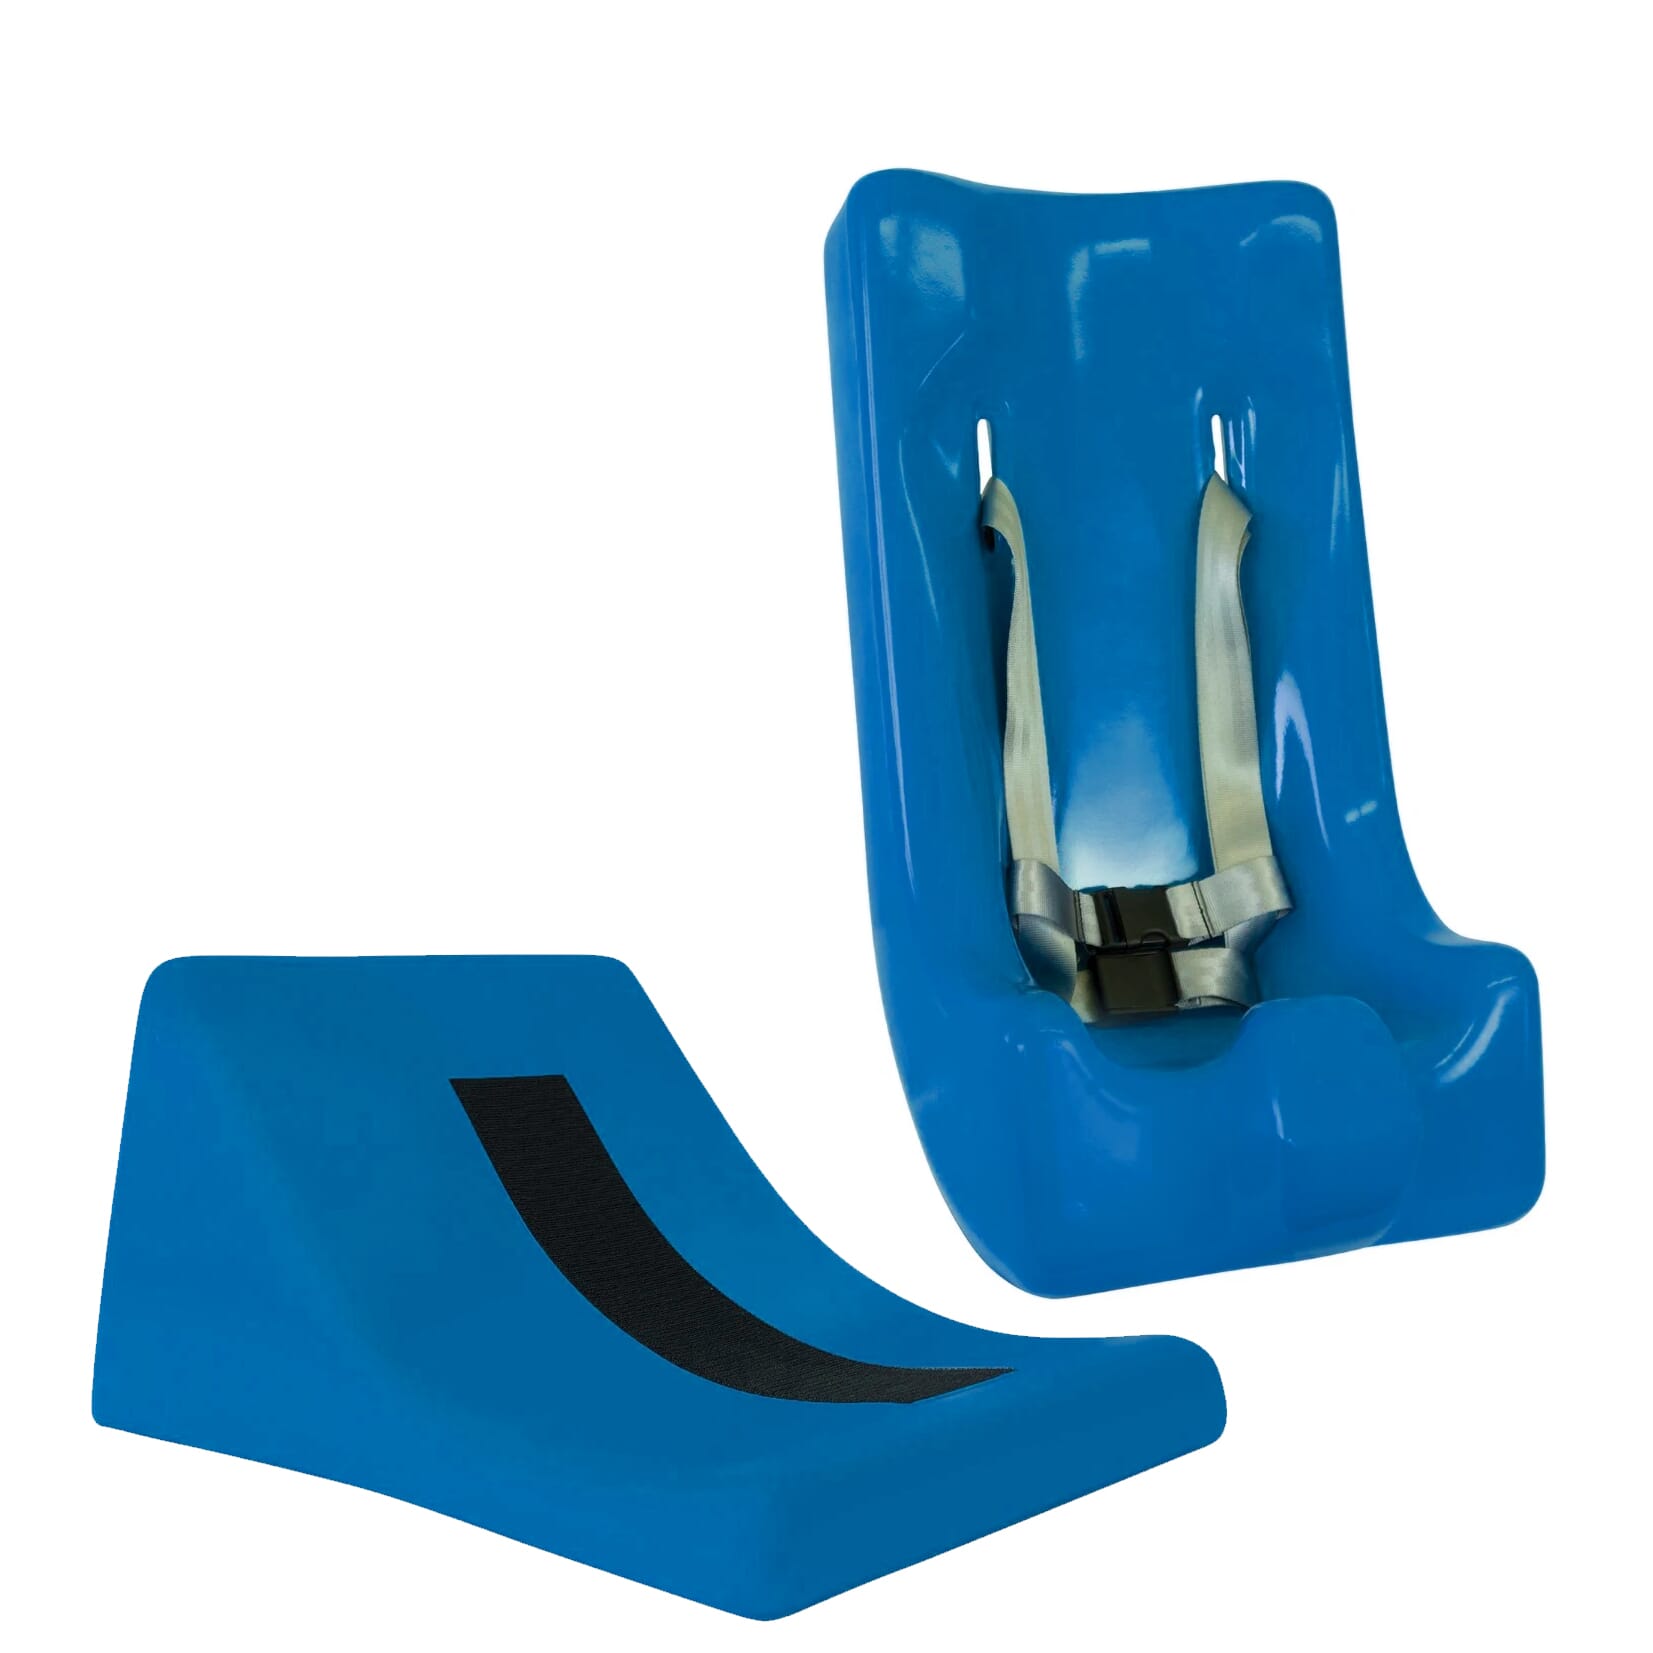 View Tumble Forms Deluxe Floor Sitter Set Medium Blue information